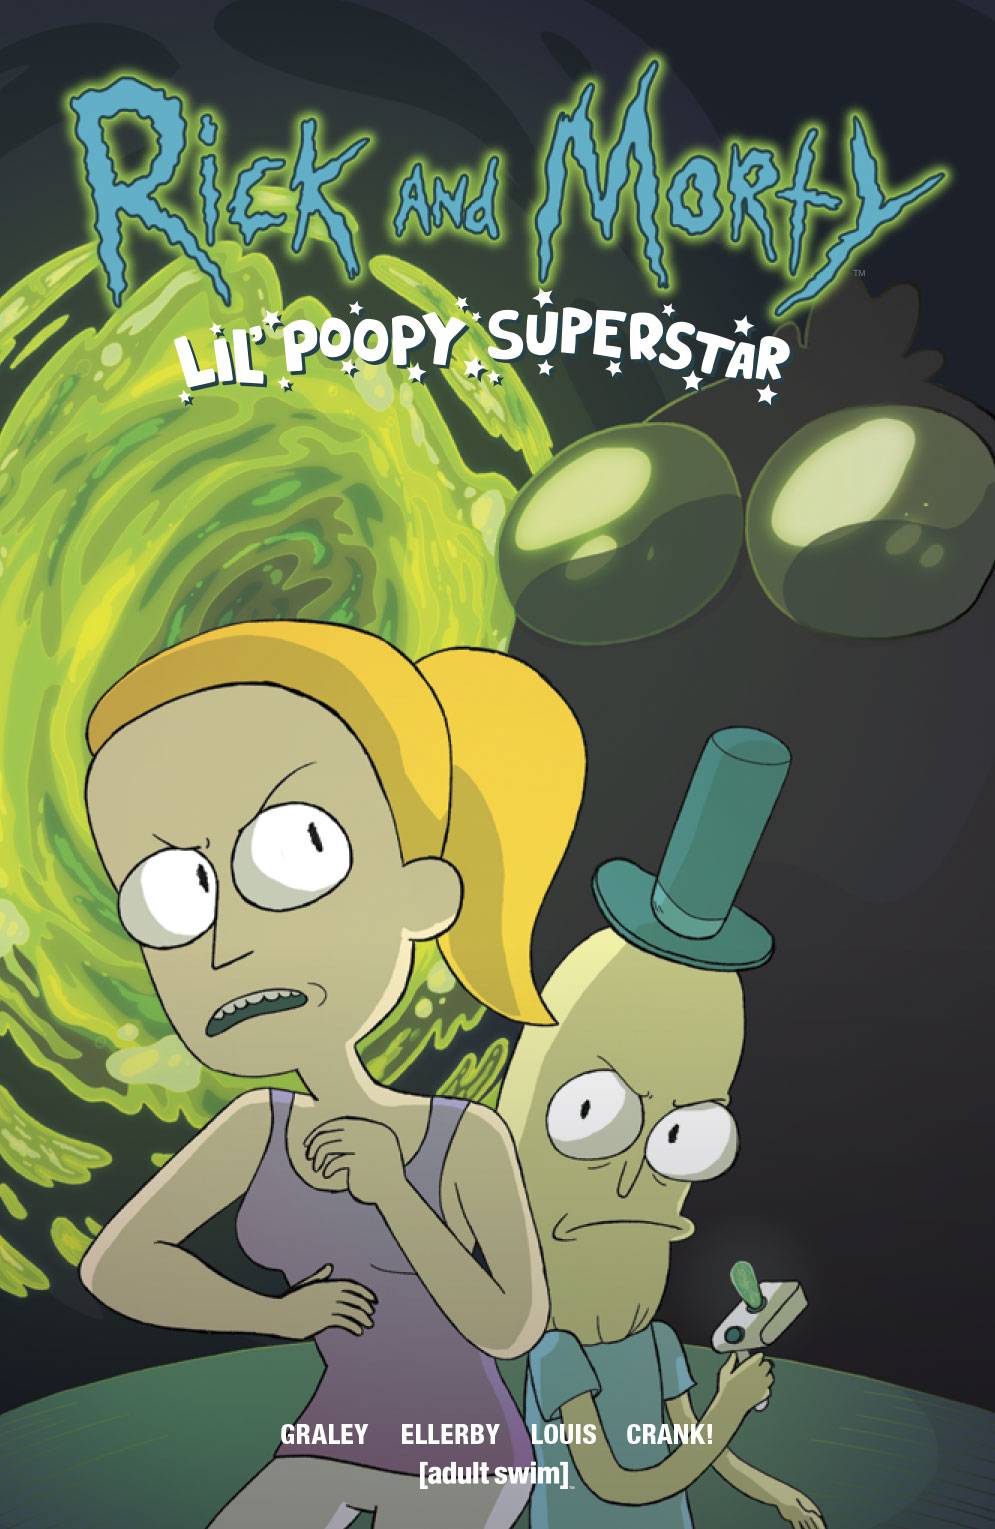 Rick and Morty Lil Poopy Superstar Graphic Novel Volume 1